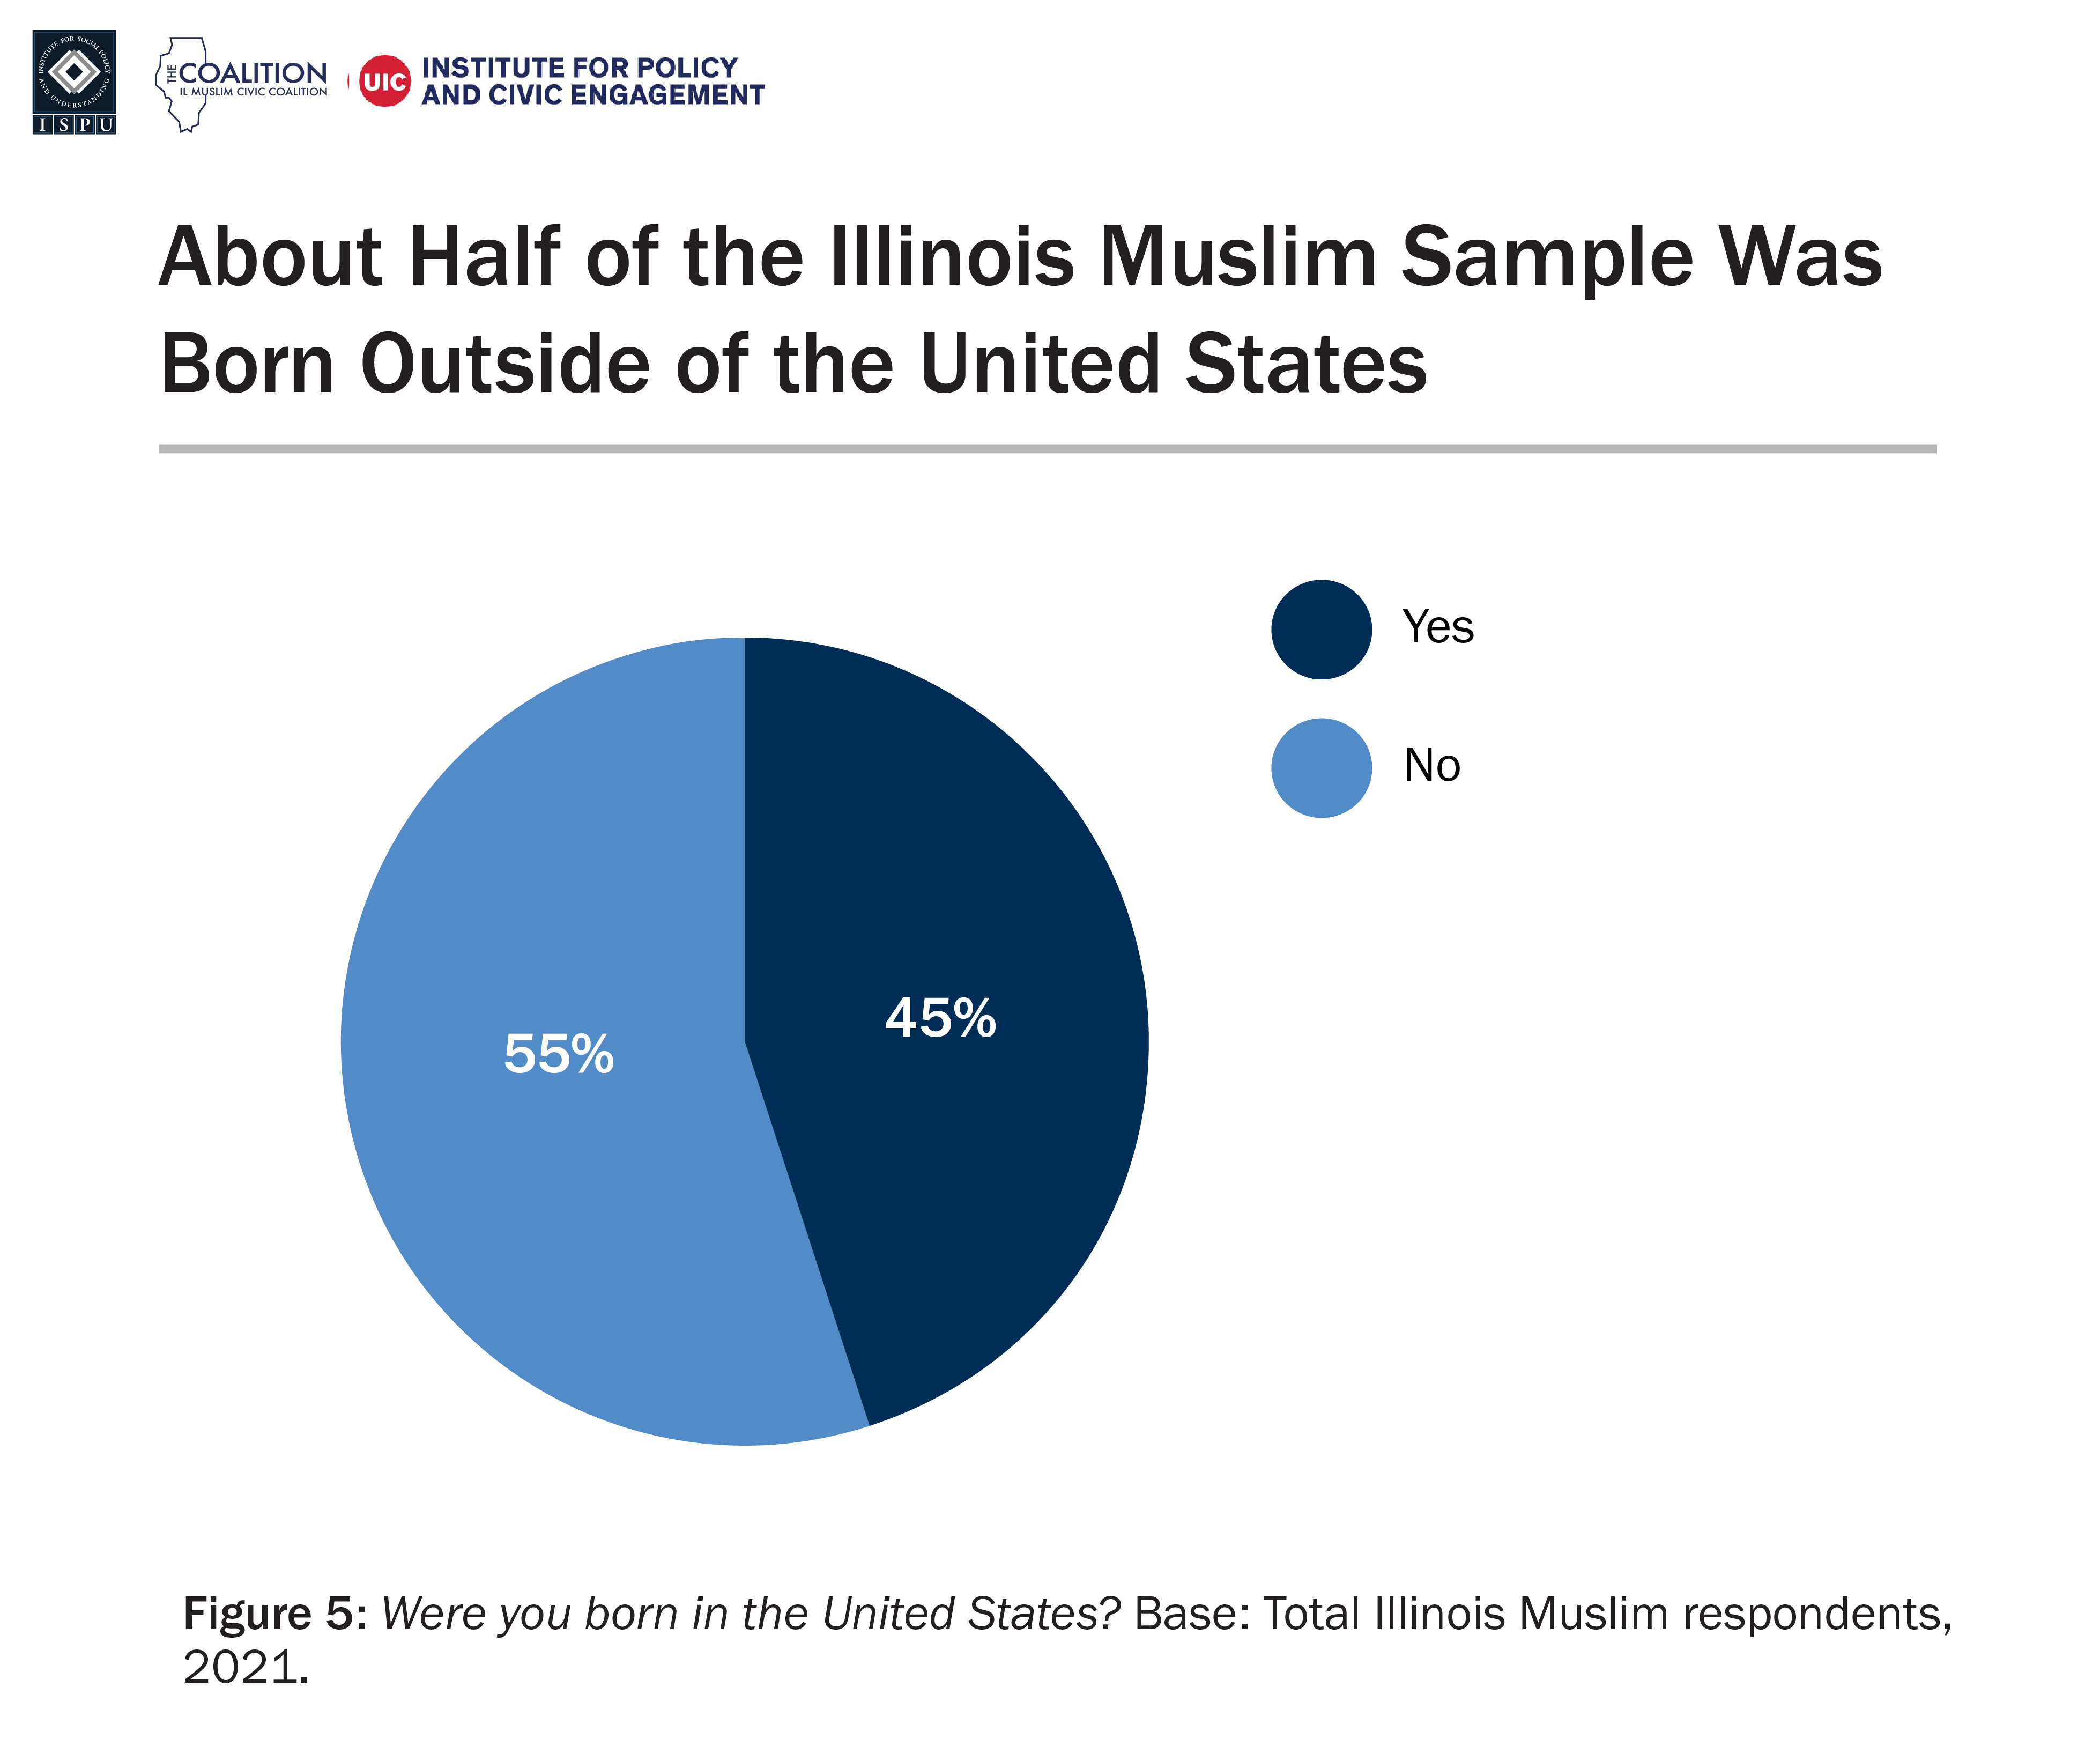 A pie chart showing the proportion of the Illinois Muslim sample born in the United States vs. outside of the United States